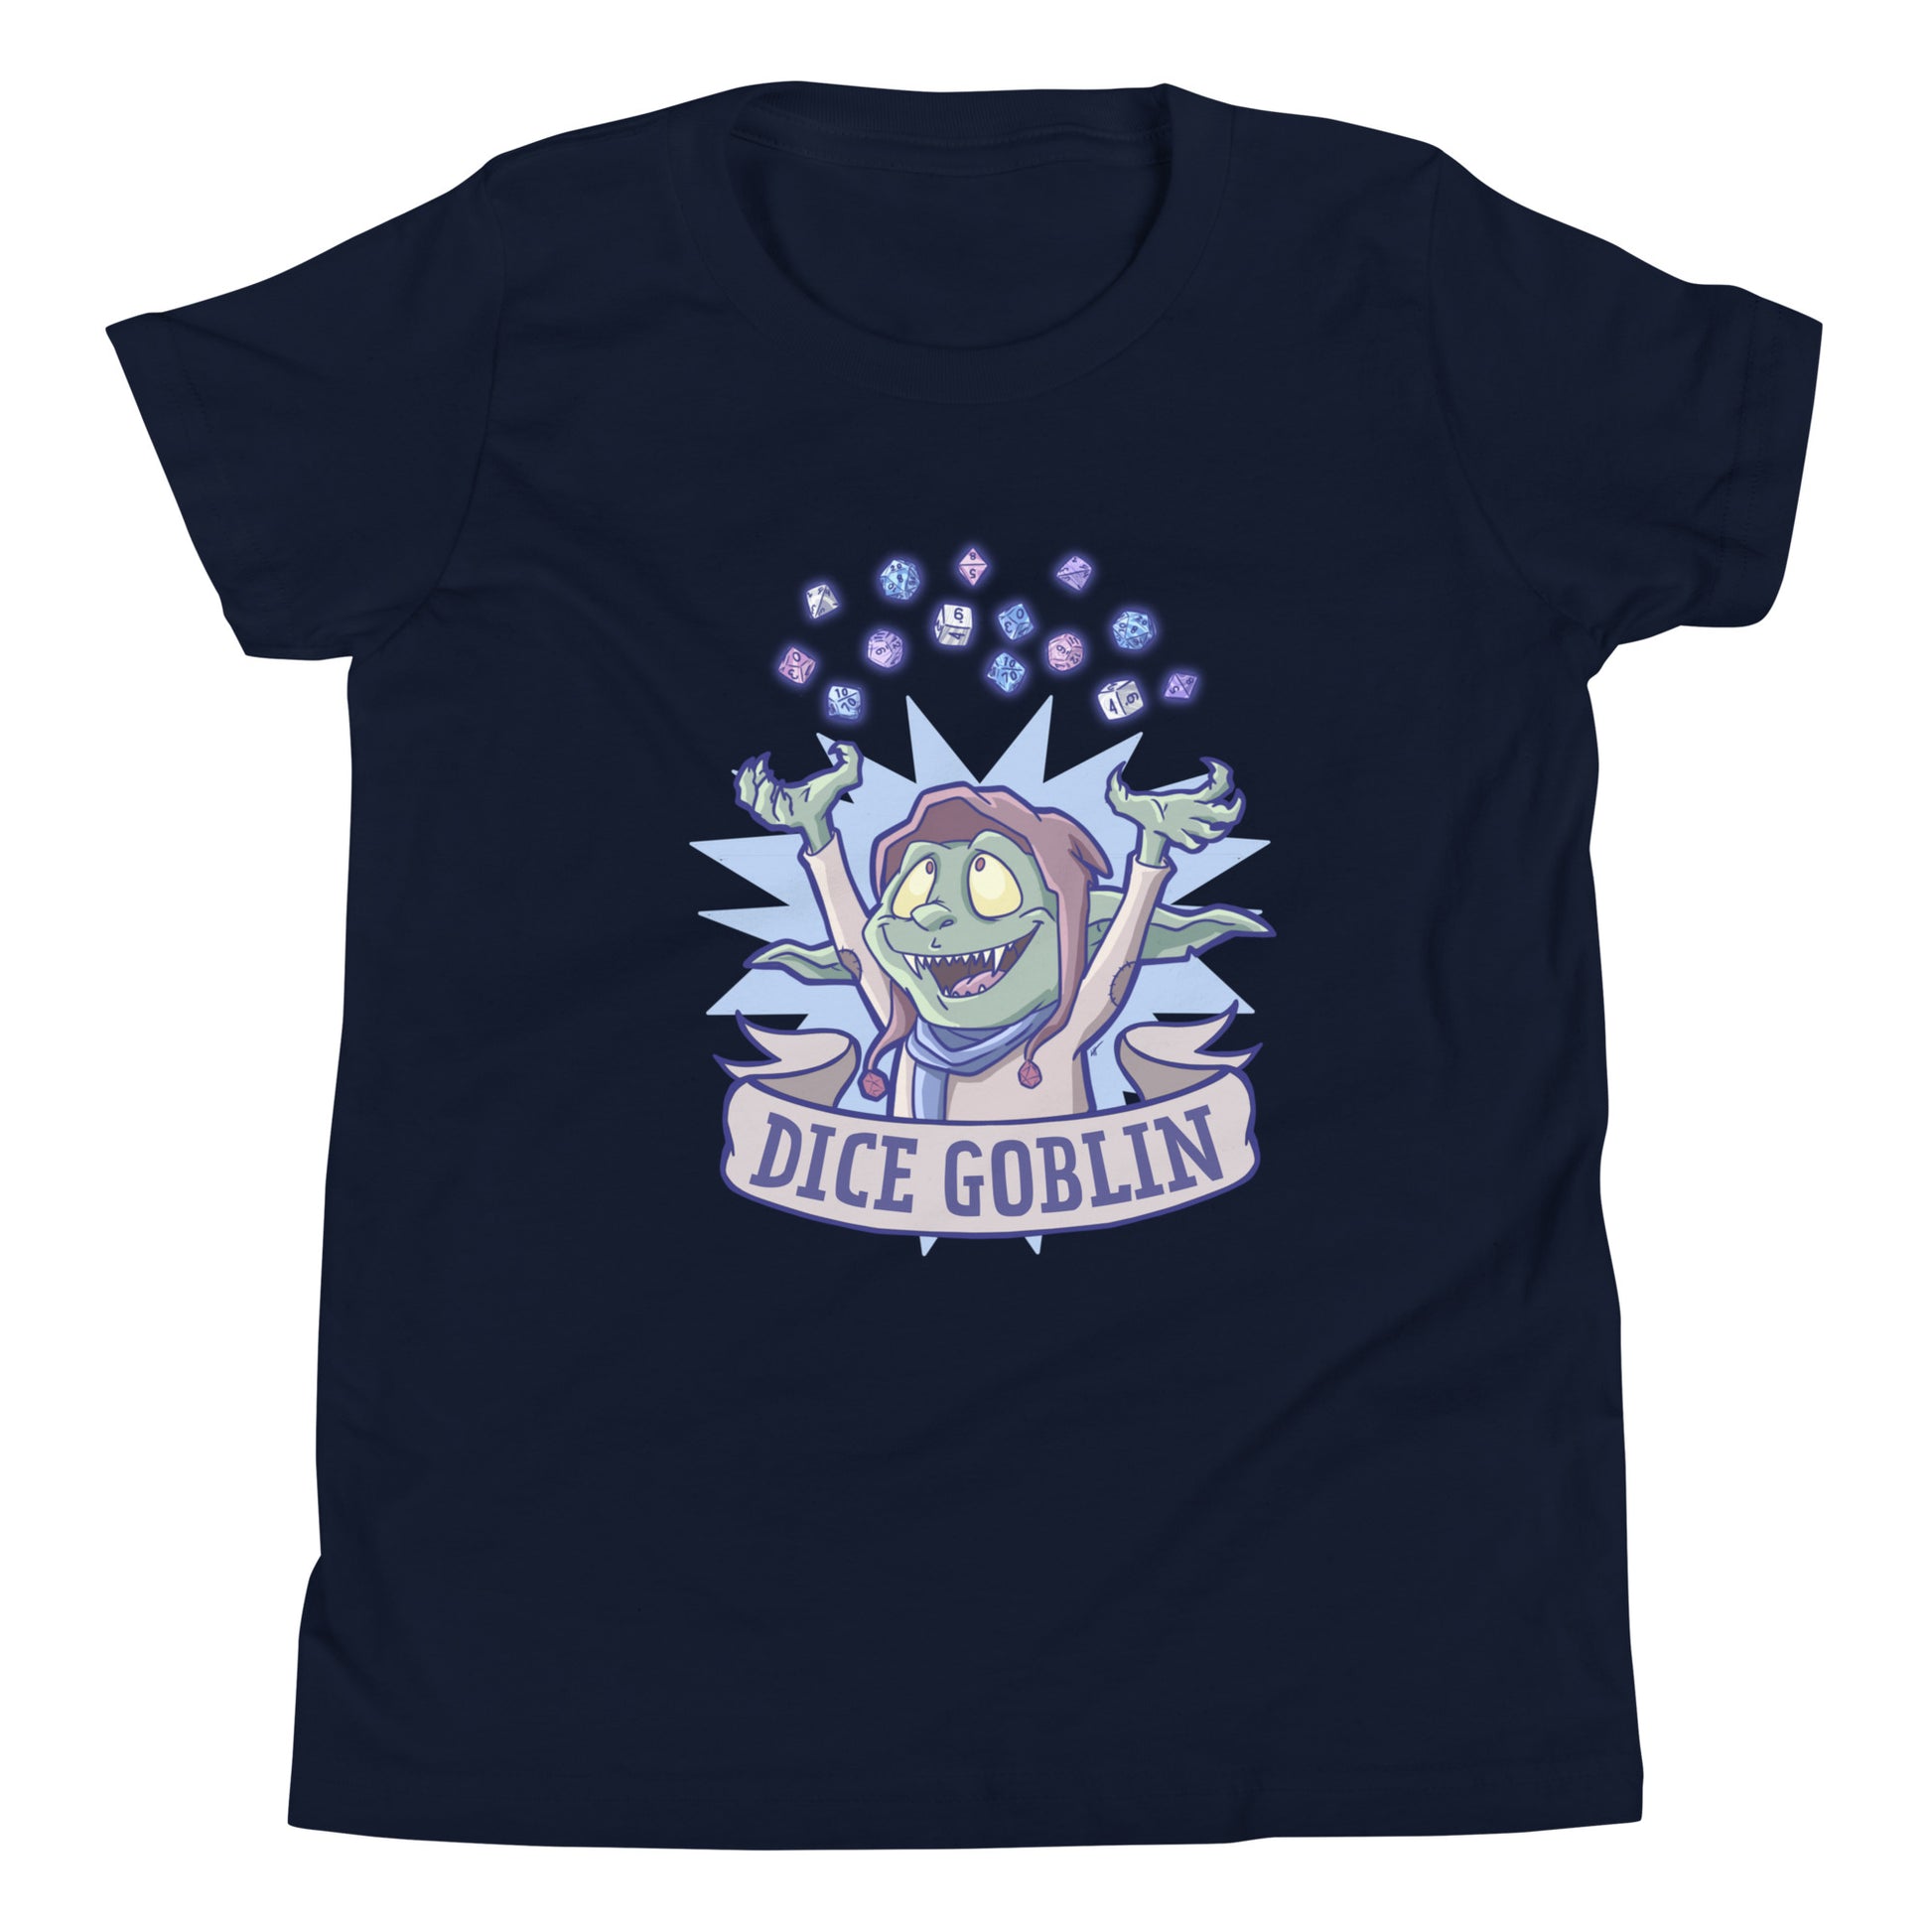 Dice Goblin Youth Short Sleeve T-Shirt  Level 1 Gamers Navy S 